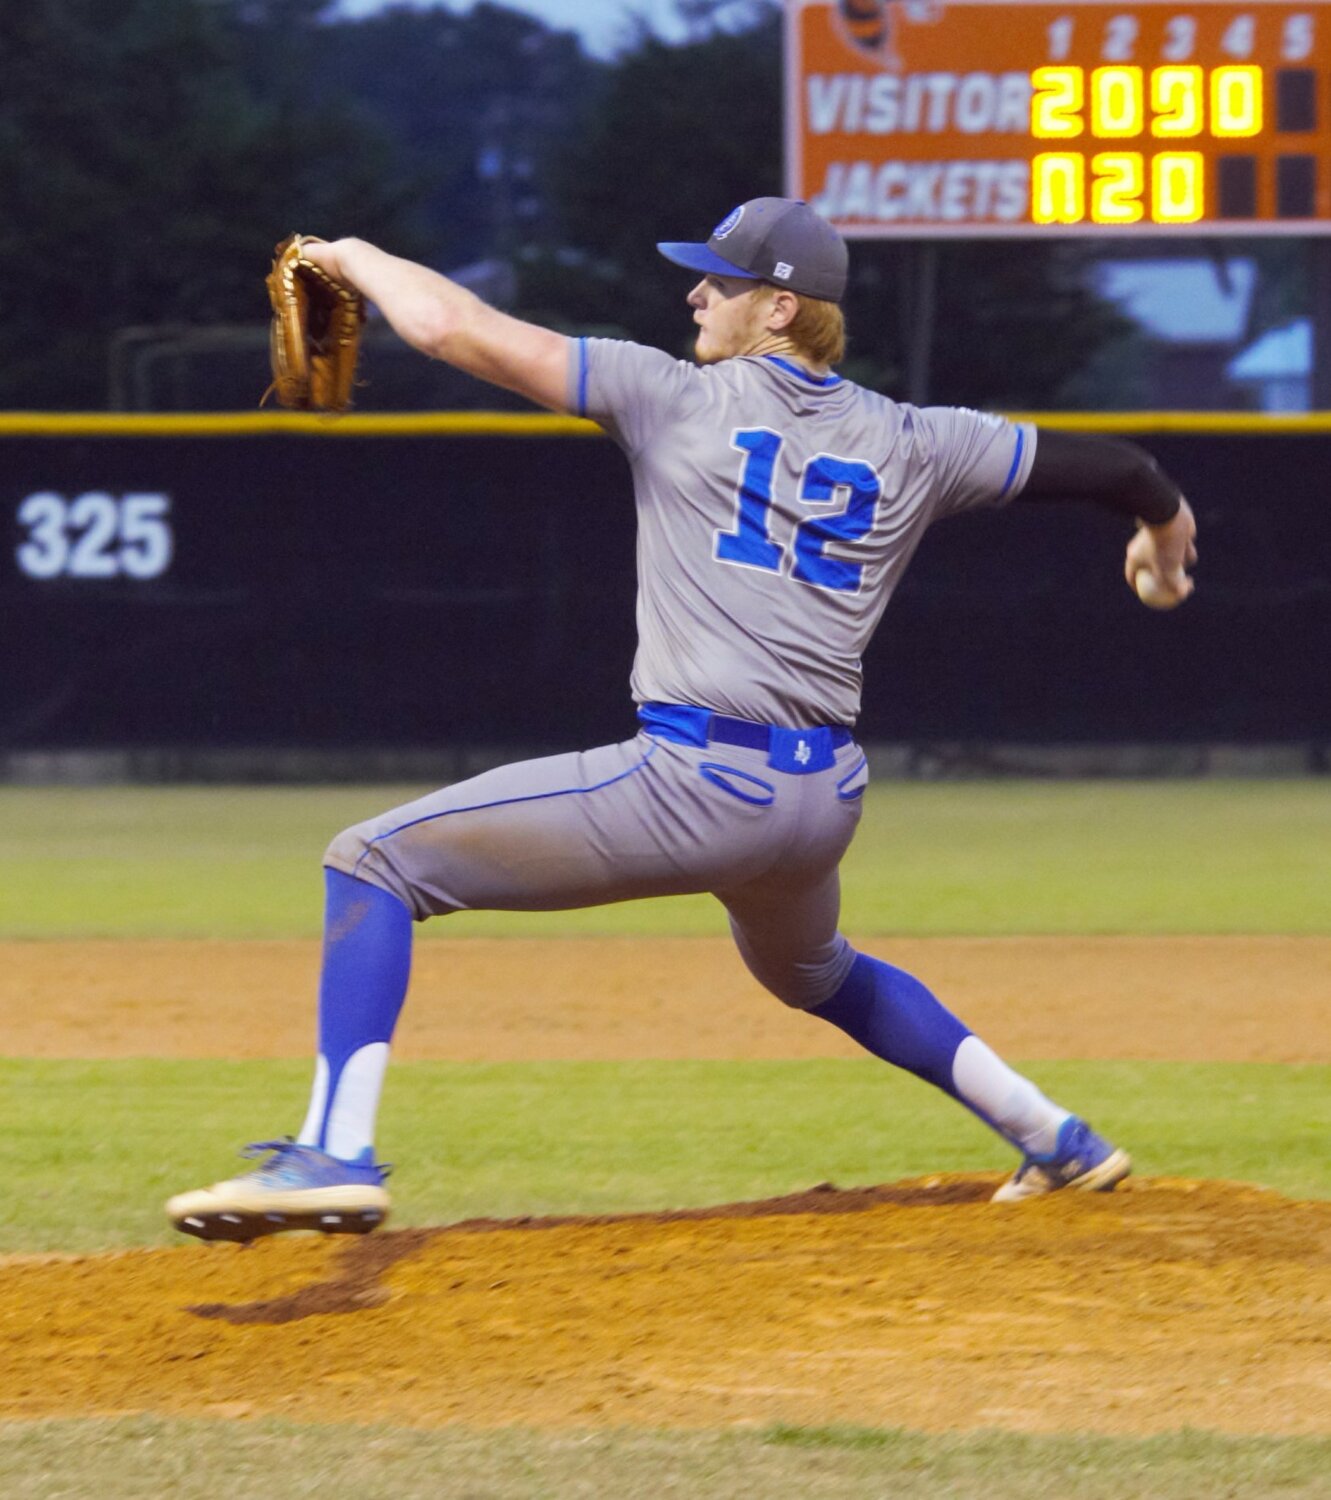 Quitman’s Landon Richey pitched a gem of a game in the 3-2 win over Mineola last Tuesday.